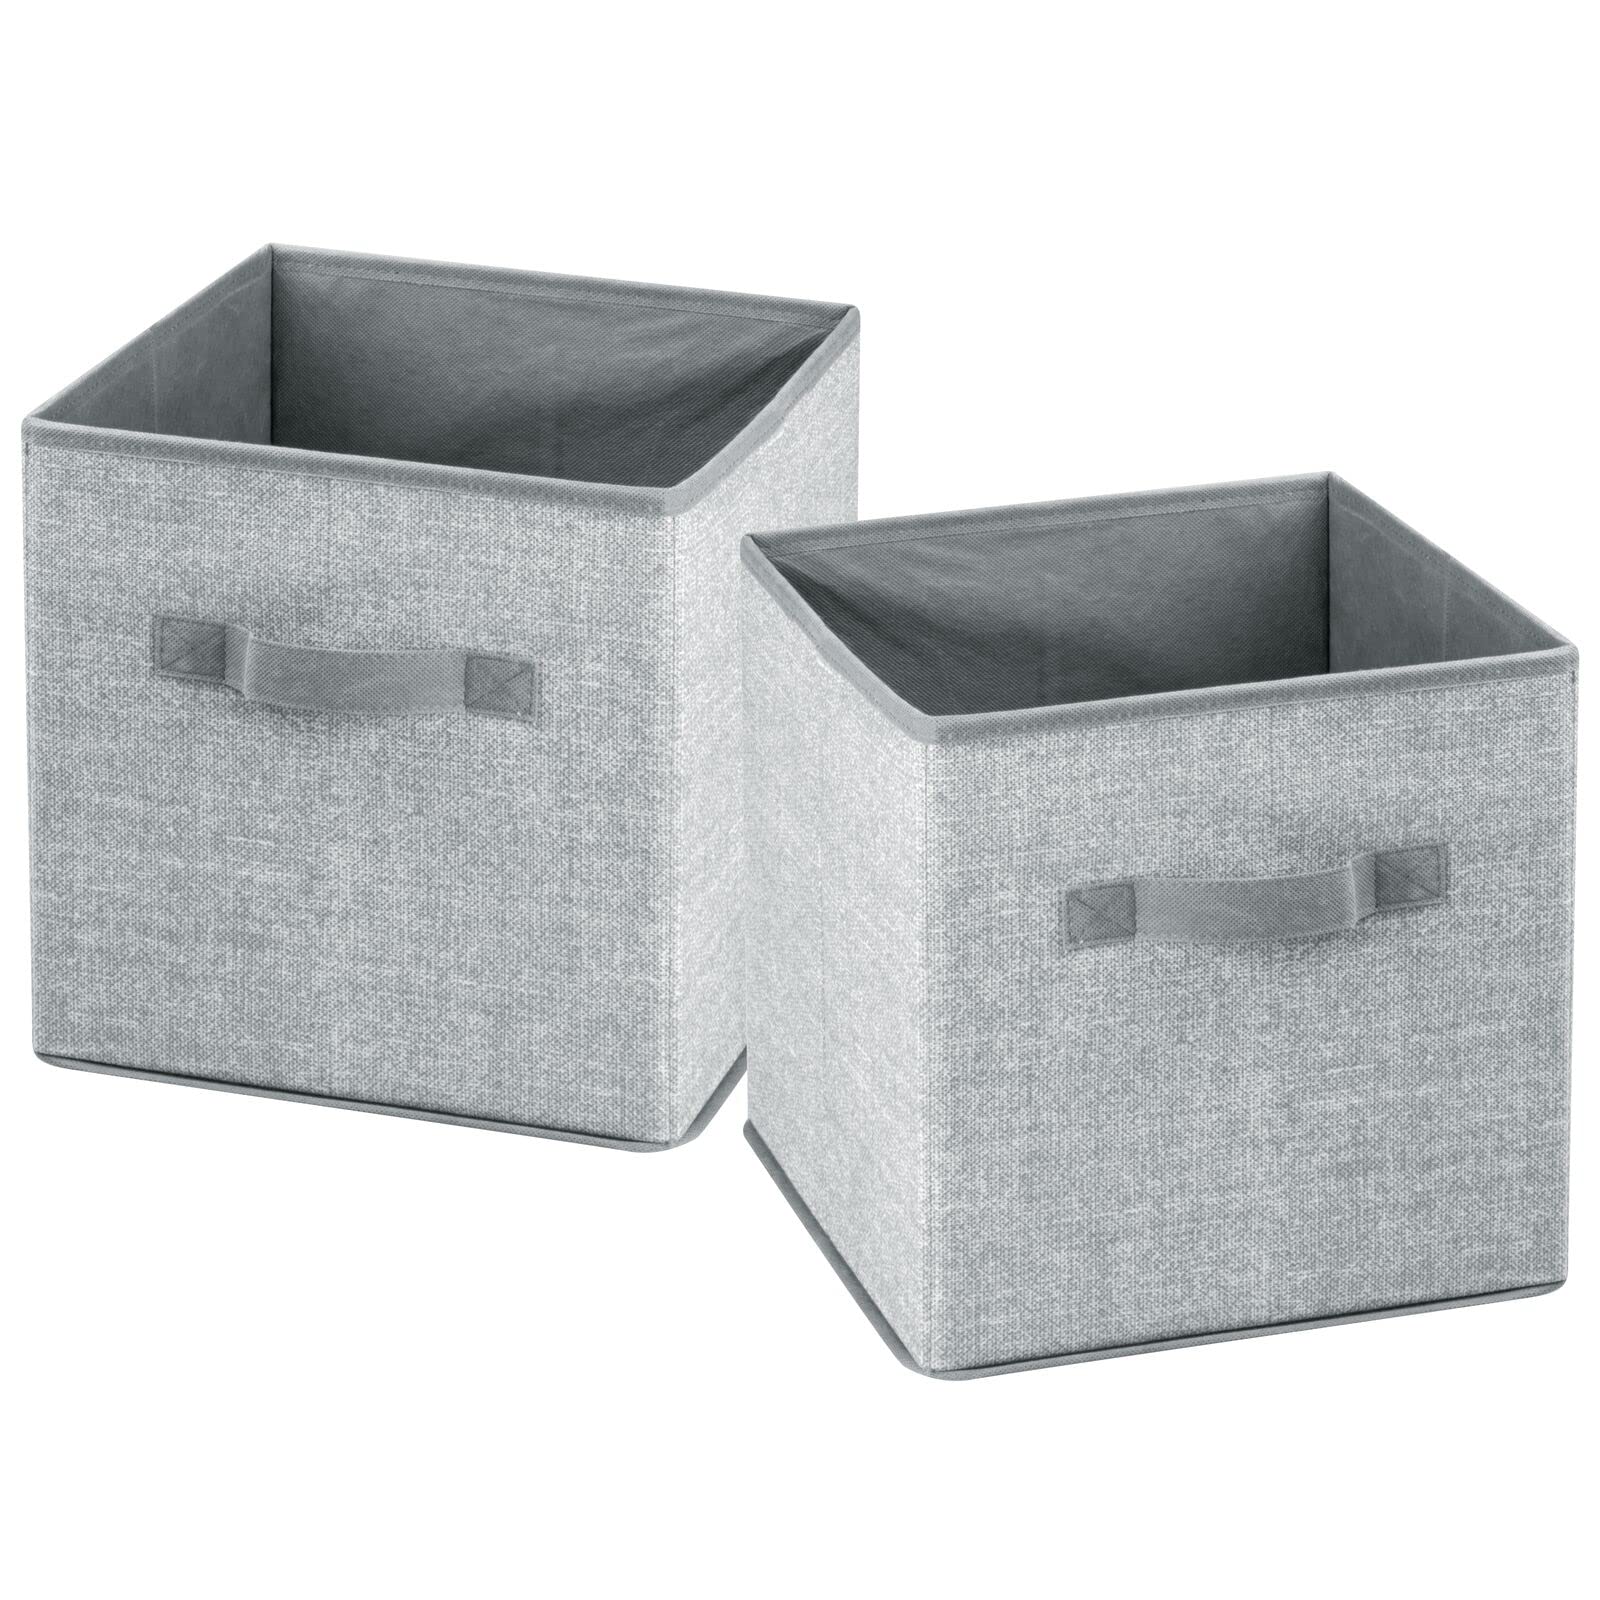 mDesign Small Fabric Collapsible Organizer Cube Bin Box with Front Handle for Cube Furniture Units, Closet or Bedroom Storage, Holds Clothing, Linens, Accessories - Lido Collection - 2 Pack - Gray